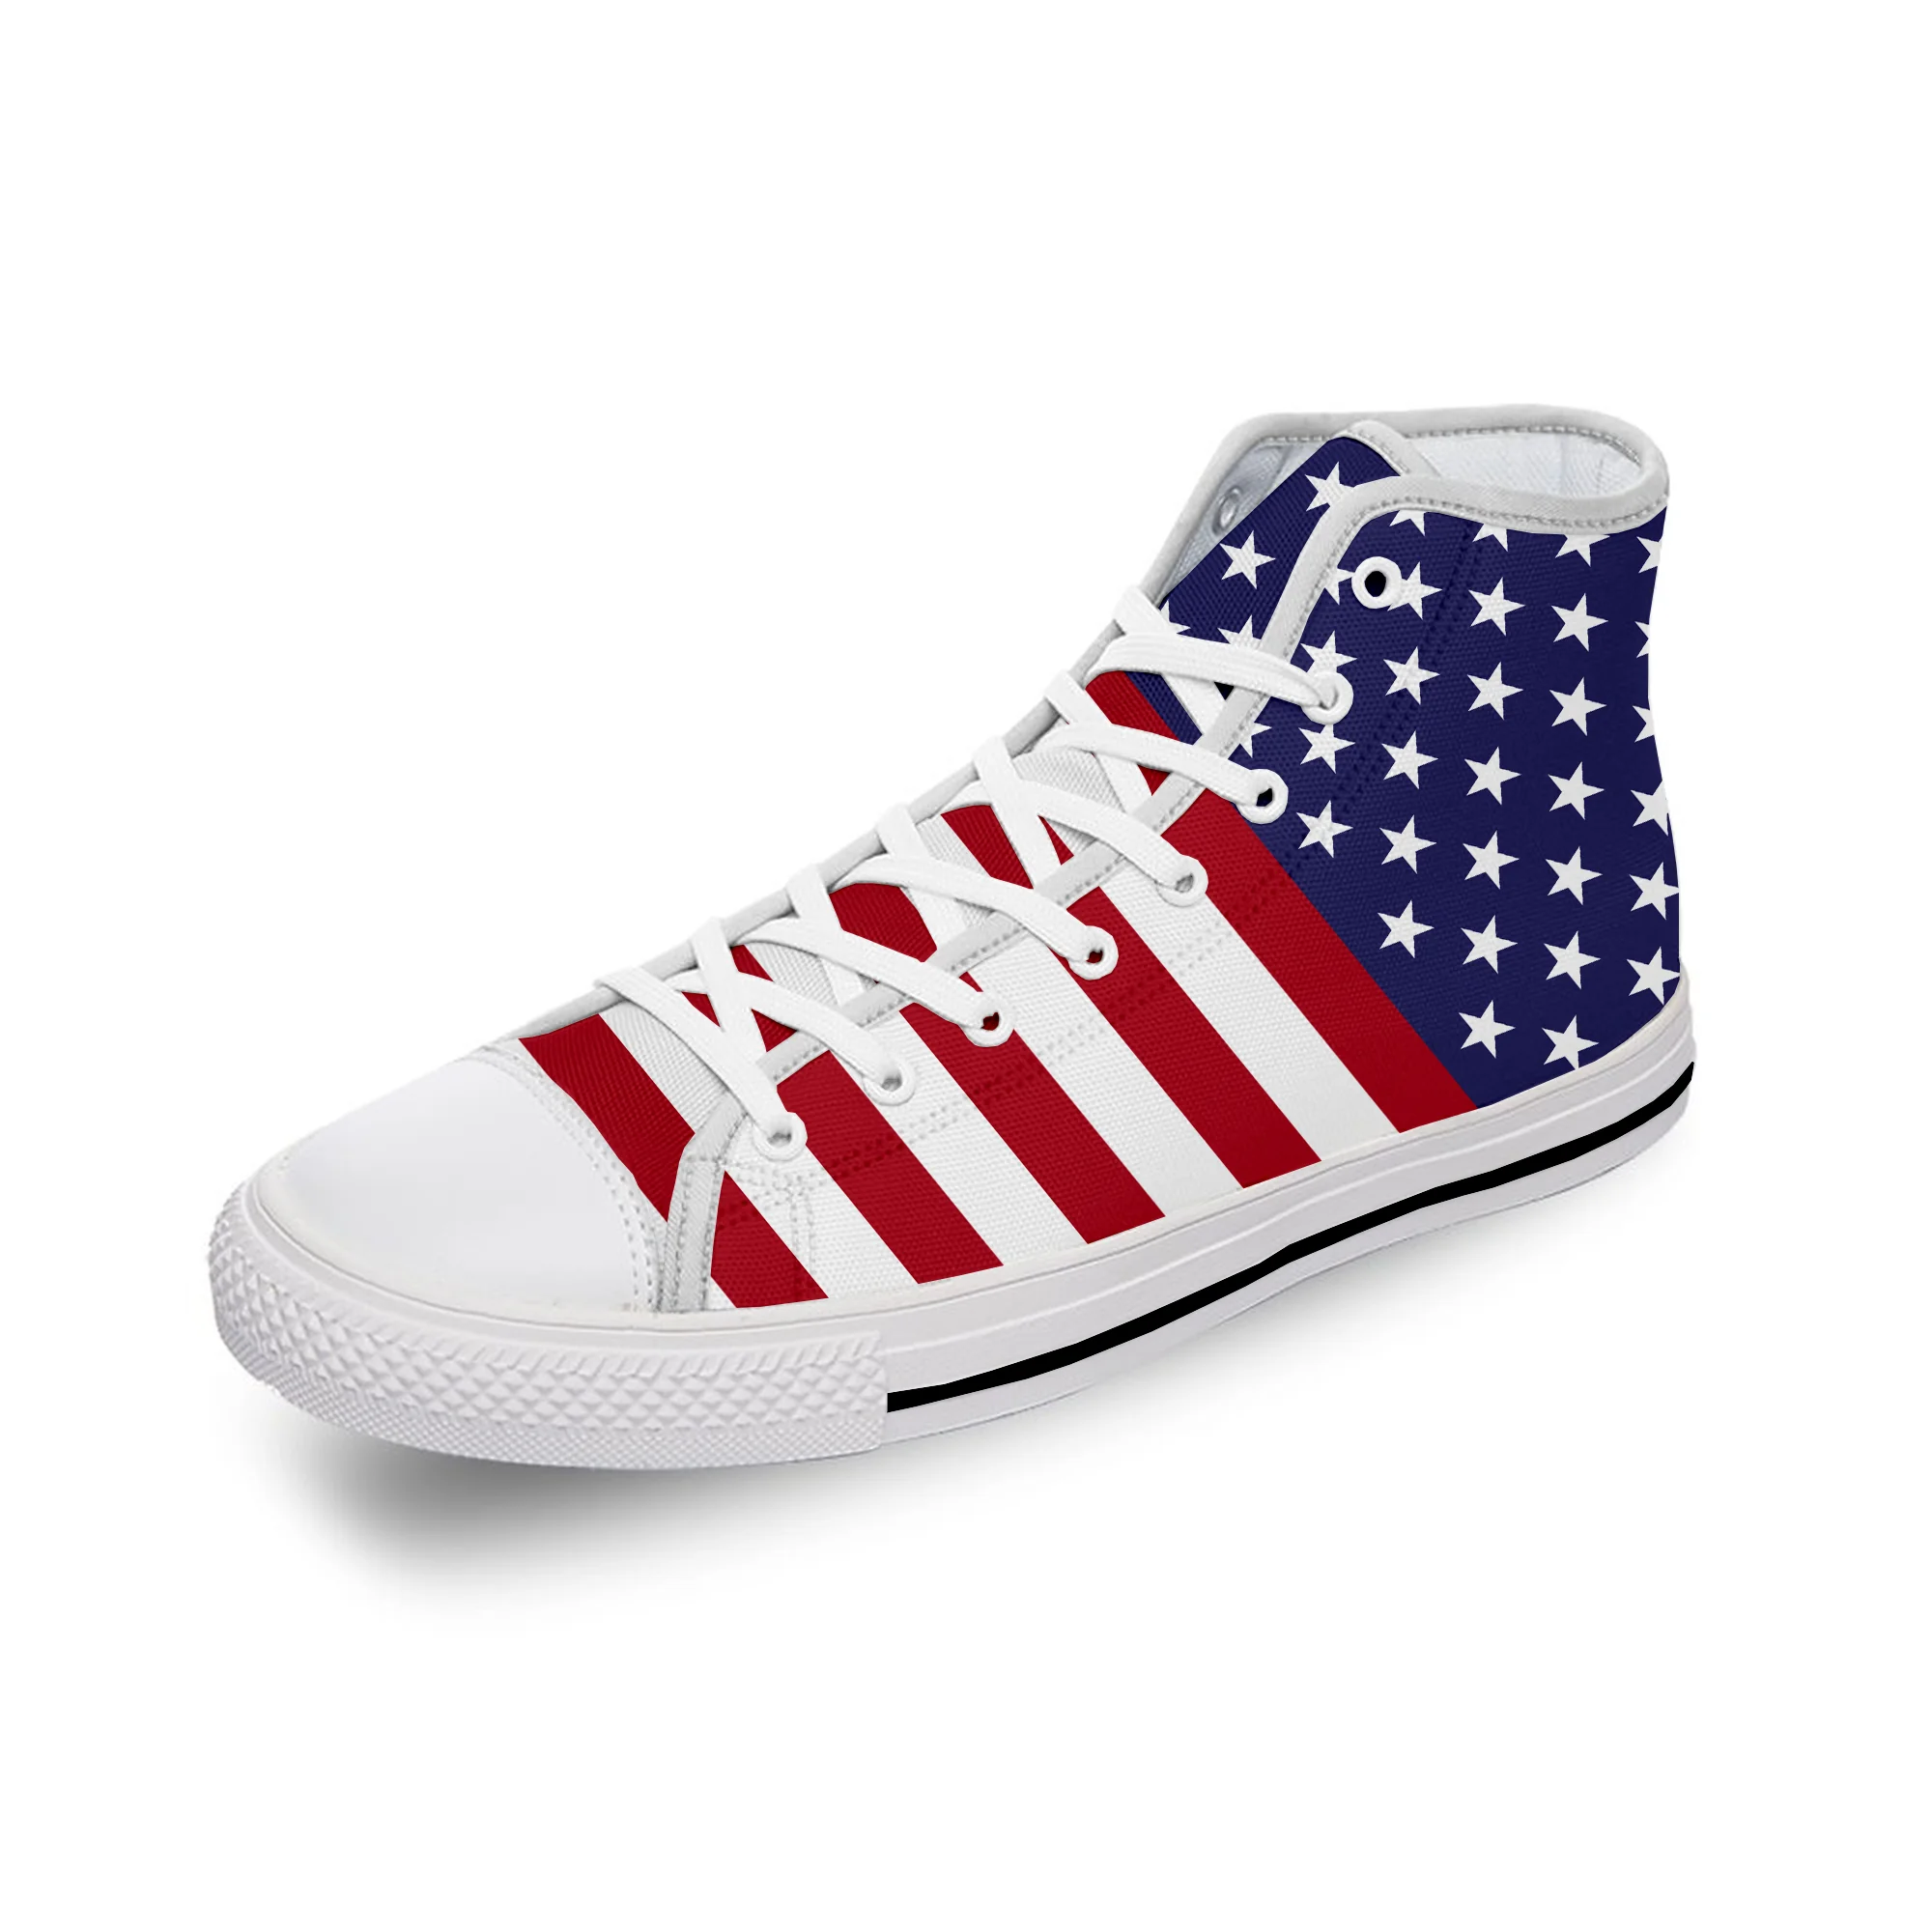 USA FLAG I LOVE AMERICA Patriot Casual Cloth Shoes High Top Lightweight Breathable Print Men Women Sneakers Sports shoe